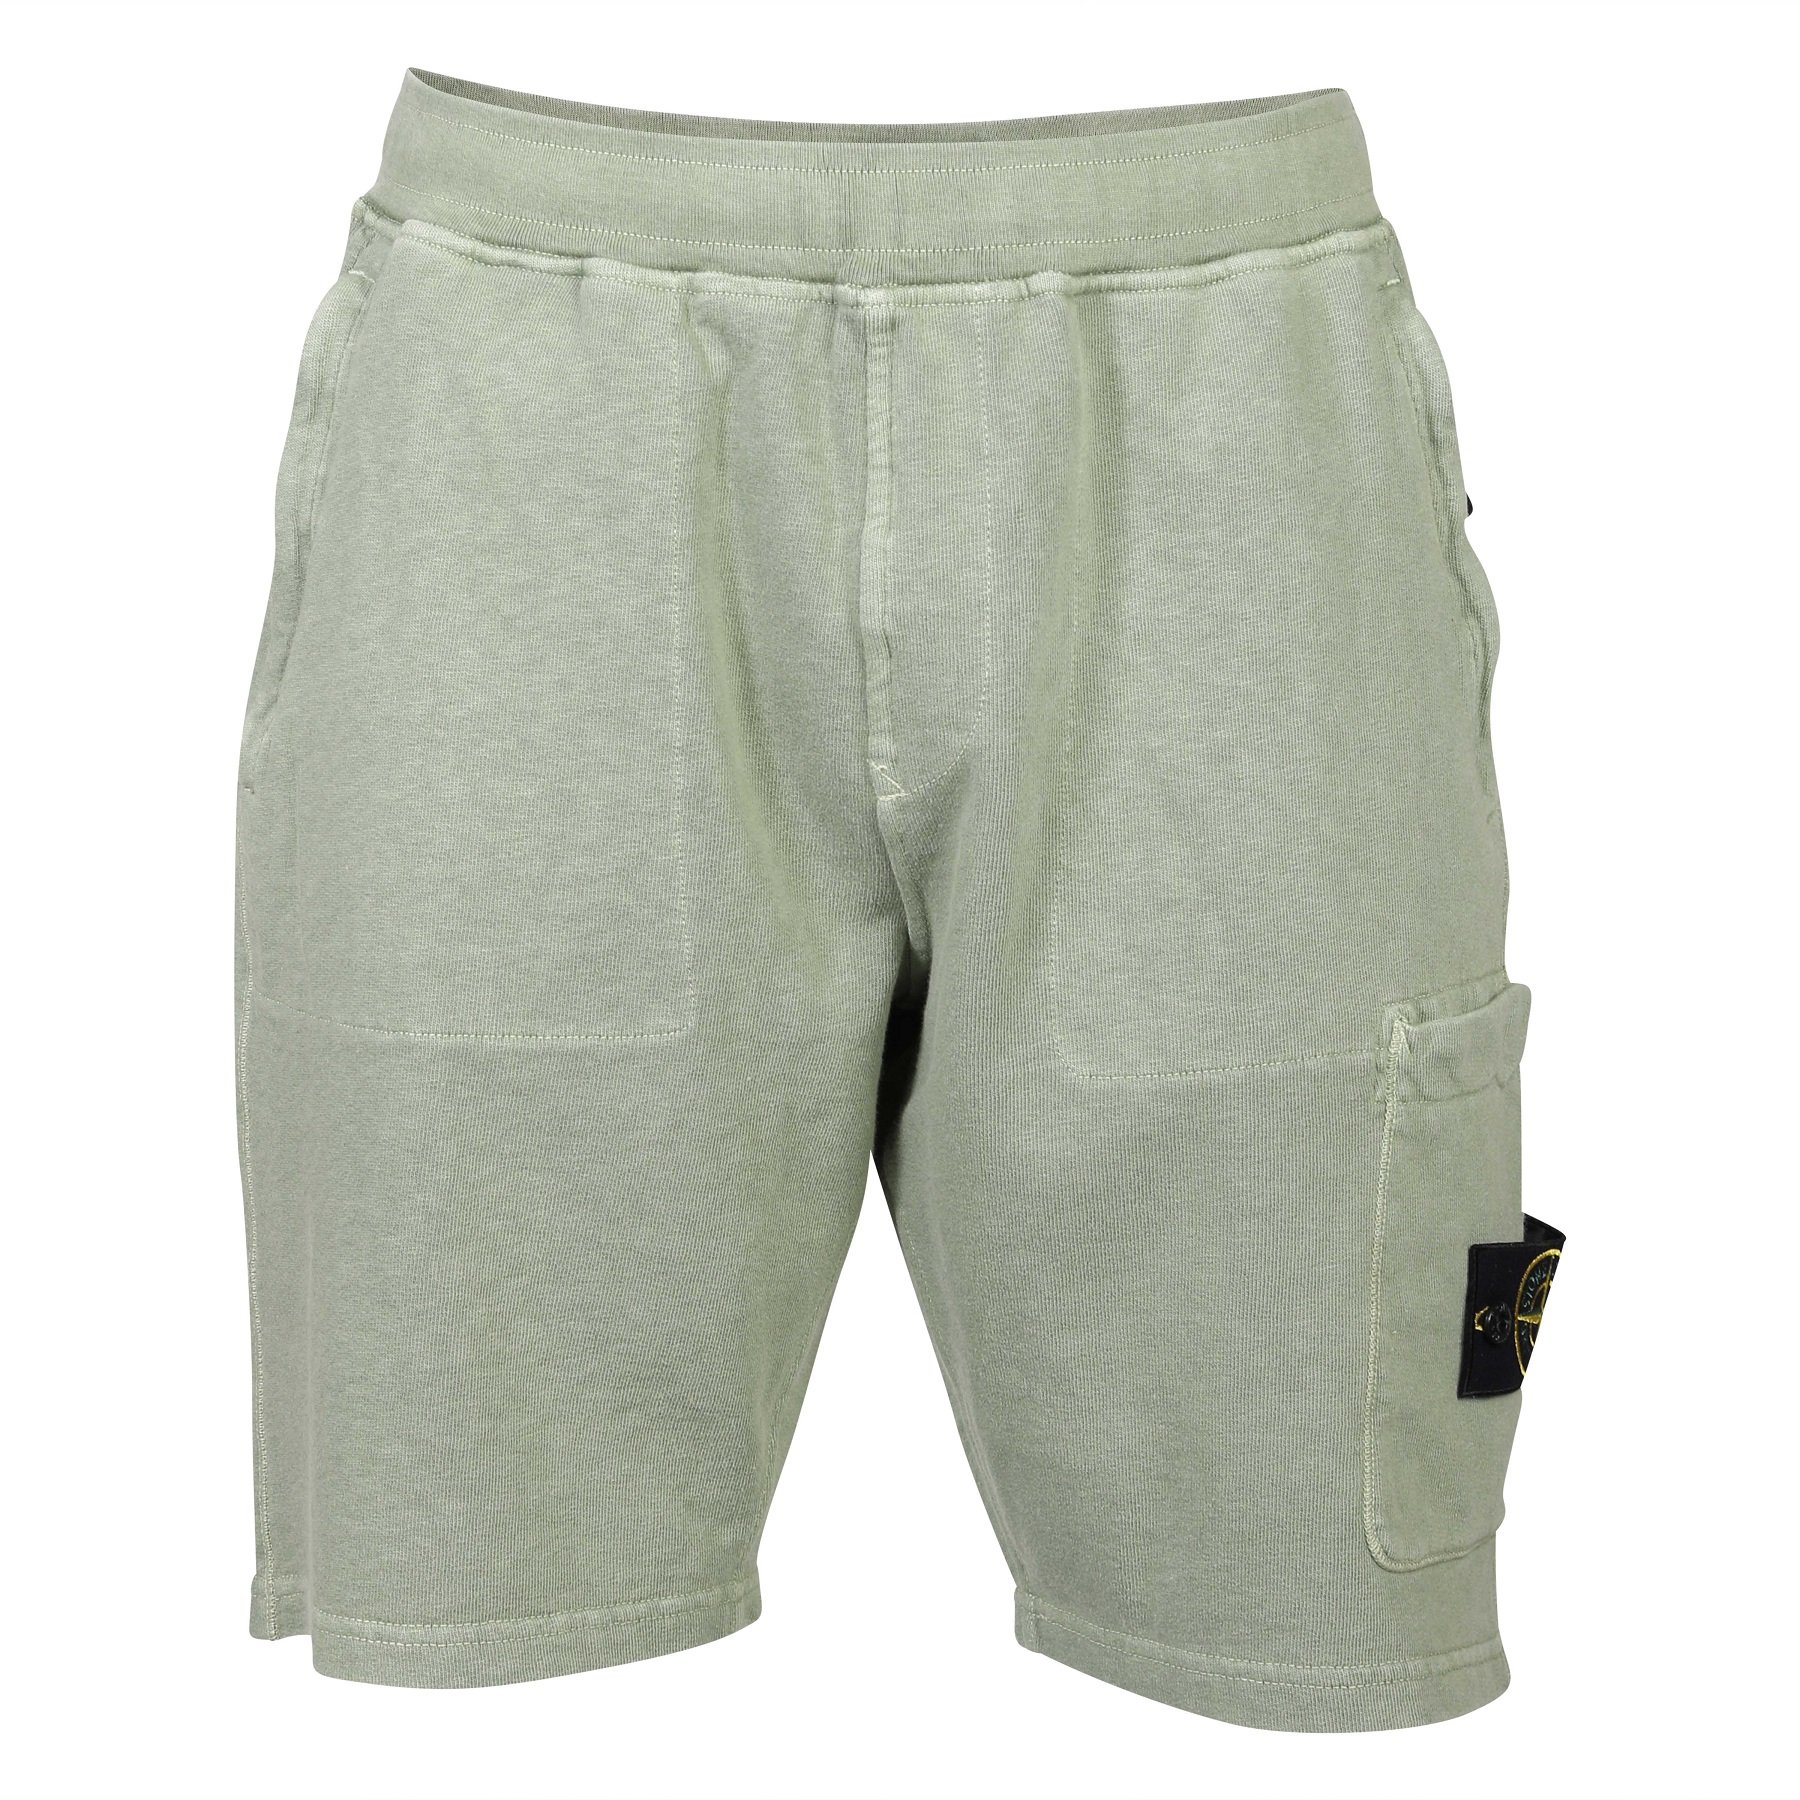 STONE ISLAND Light Sweat Short in Washed Sage S